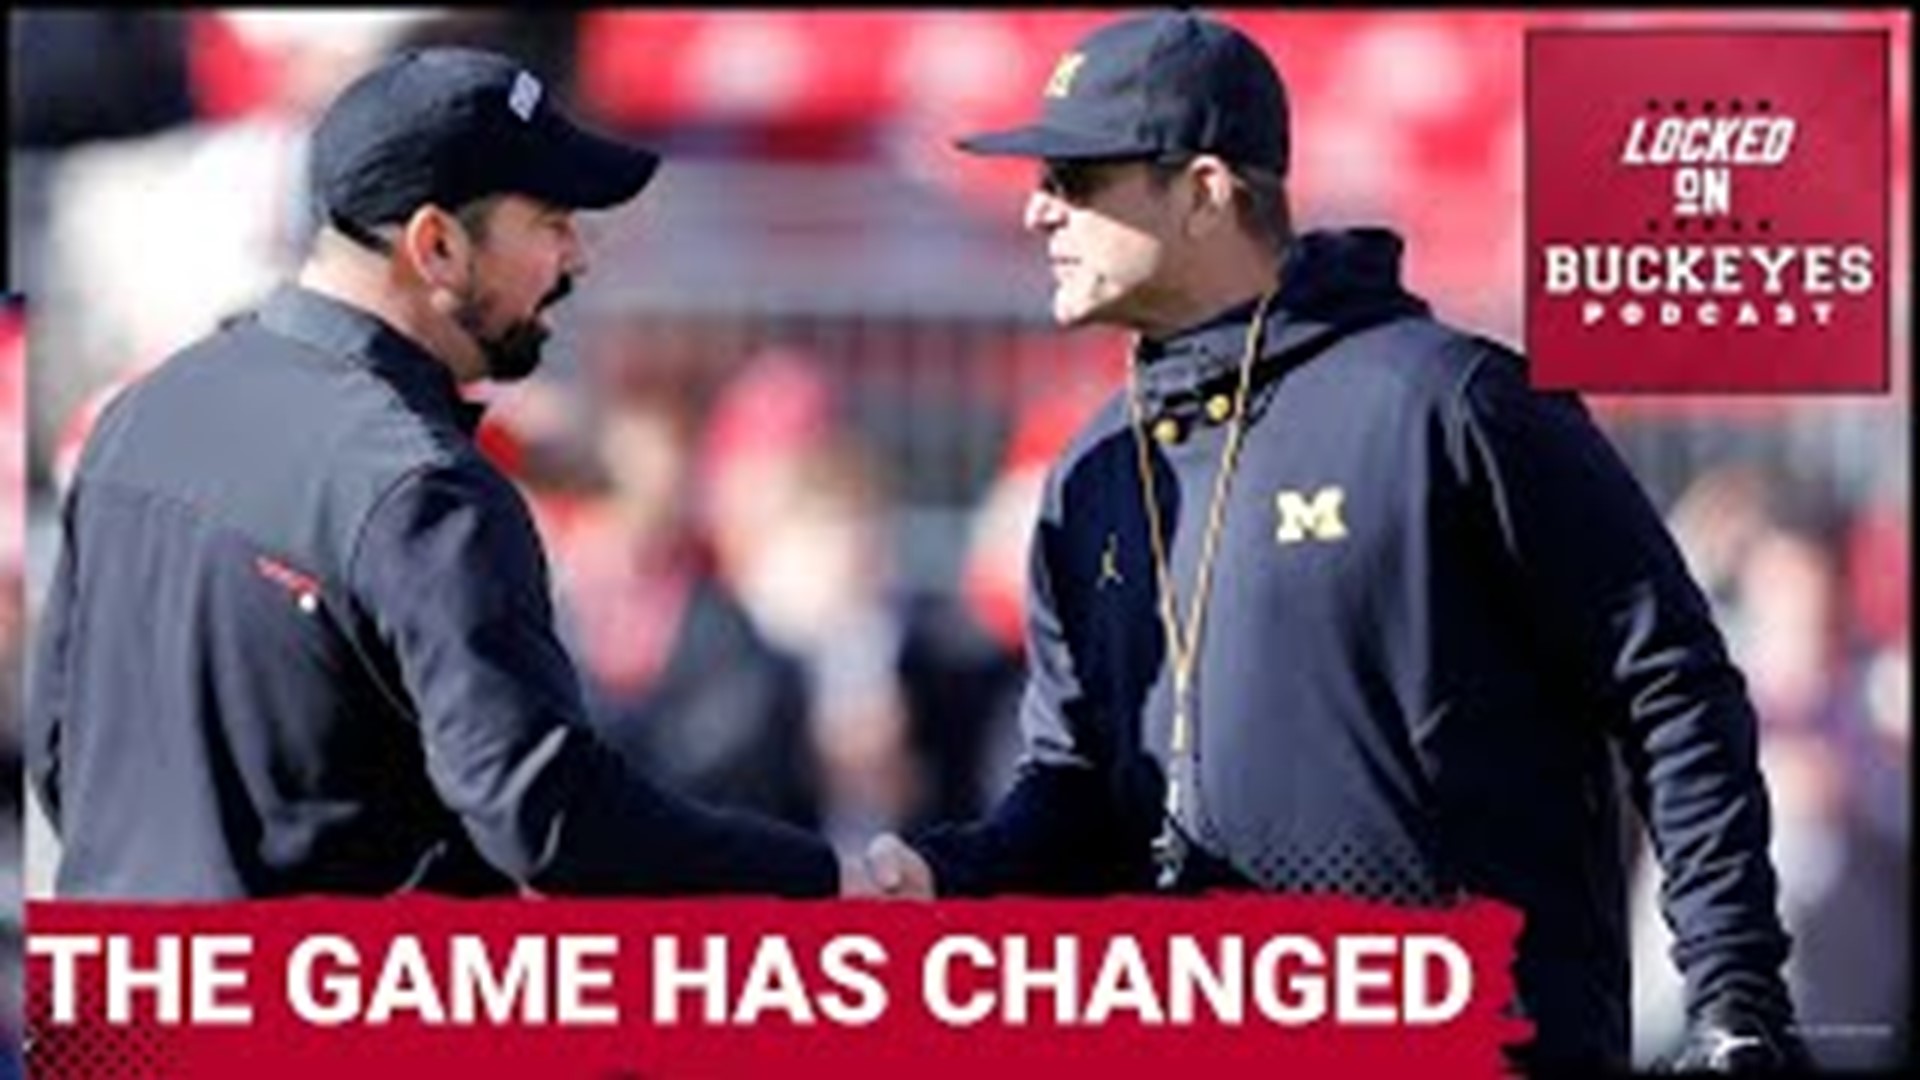 How Jim Harbaugh's Departure for NFL Impacts Ohio State, Michigan Rivalry